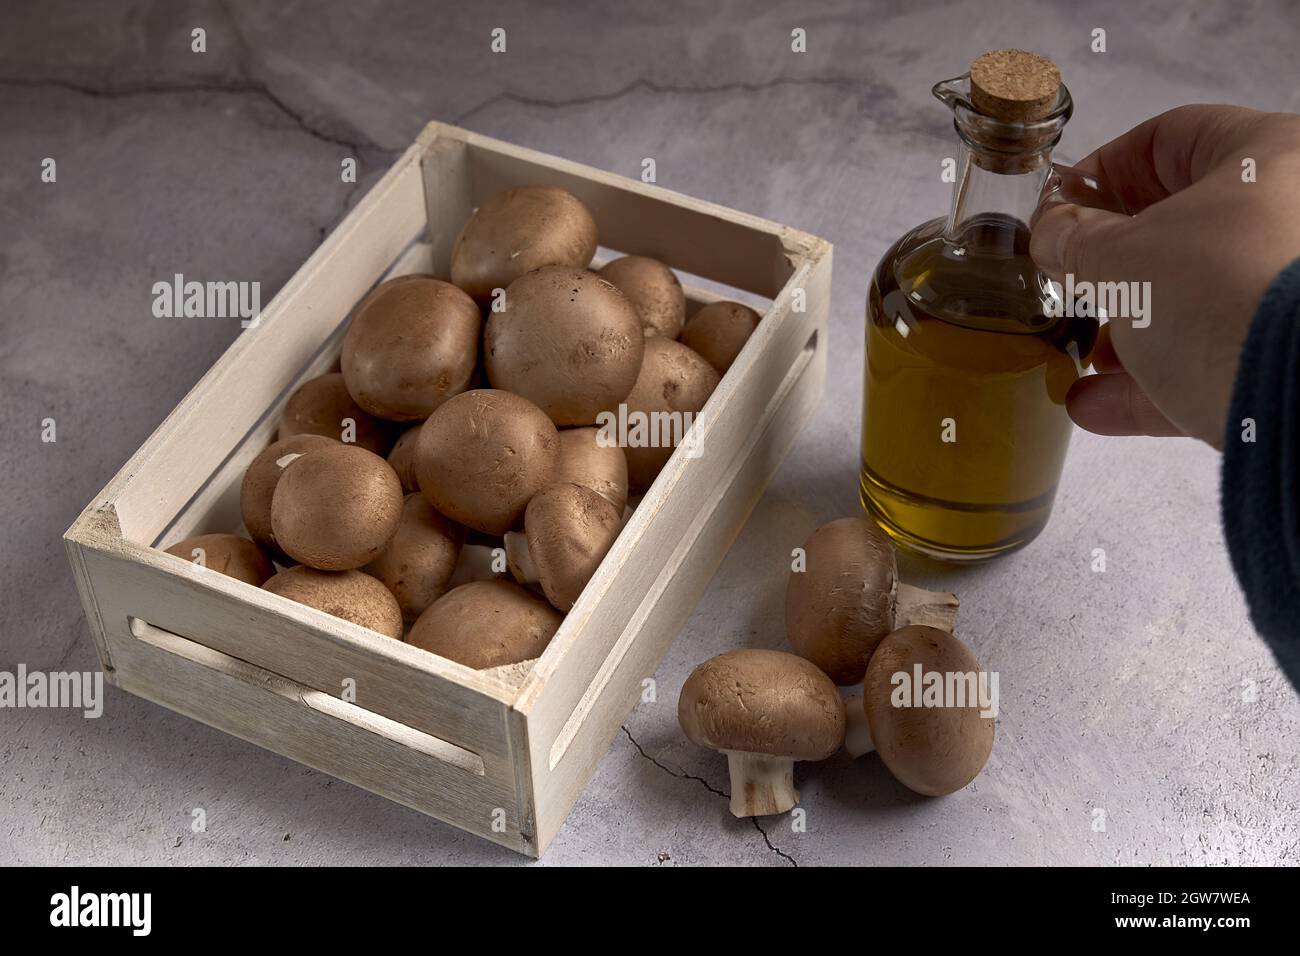 Group Of Portobello Mushrooms In A Wooden Box Next To An Oil Jar Stock Photo